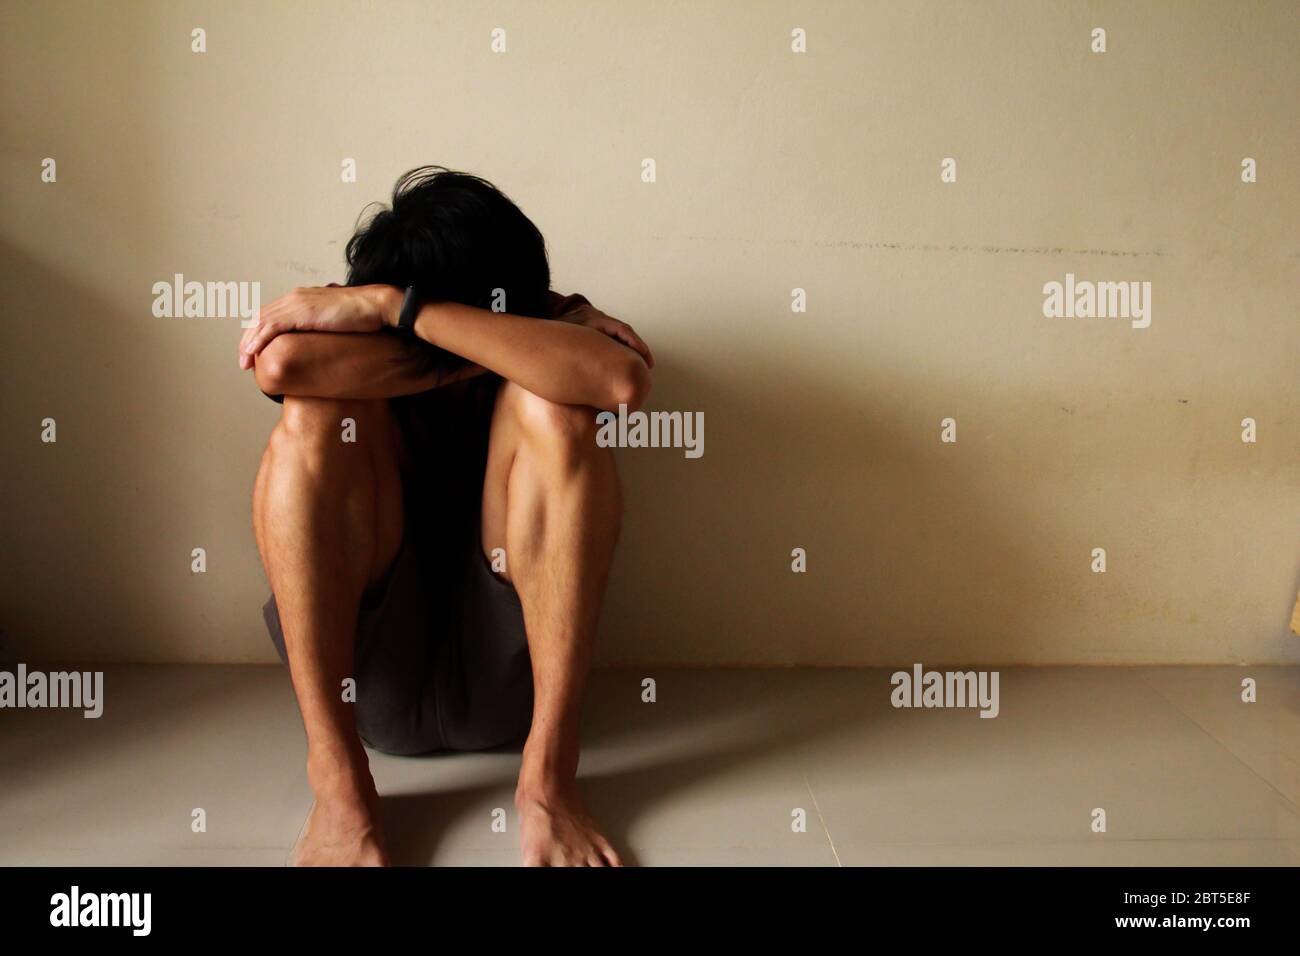 Sad Young Man Sitting Alone In A Empty Room Sad Lonely Chool Adolescence Home Violence Unwanted Love Problems Alone Family Stock Photo Alamy